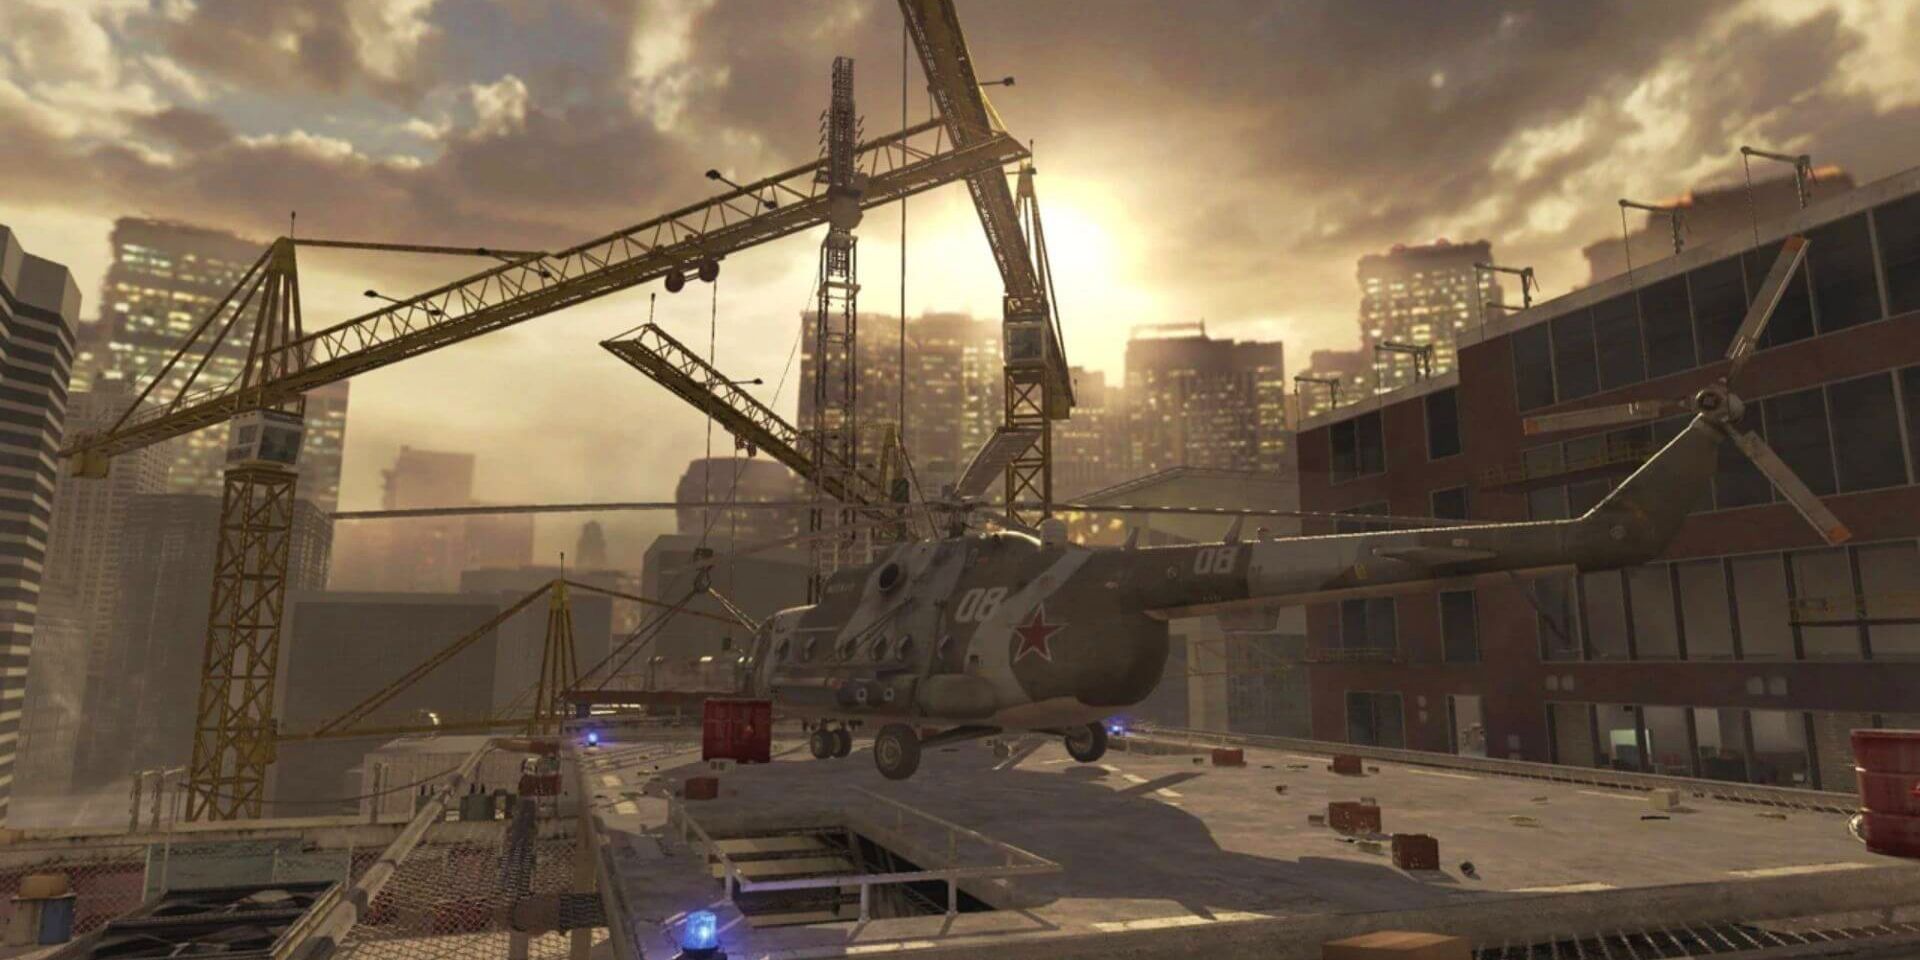 10 Best Call of Duty Maps in Franchise History